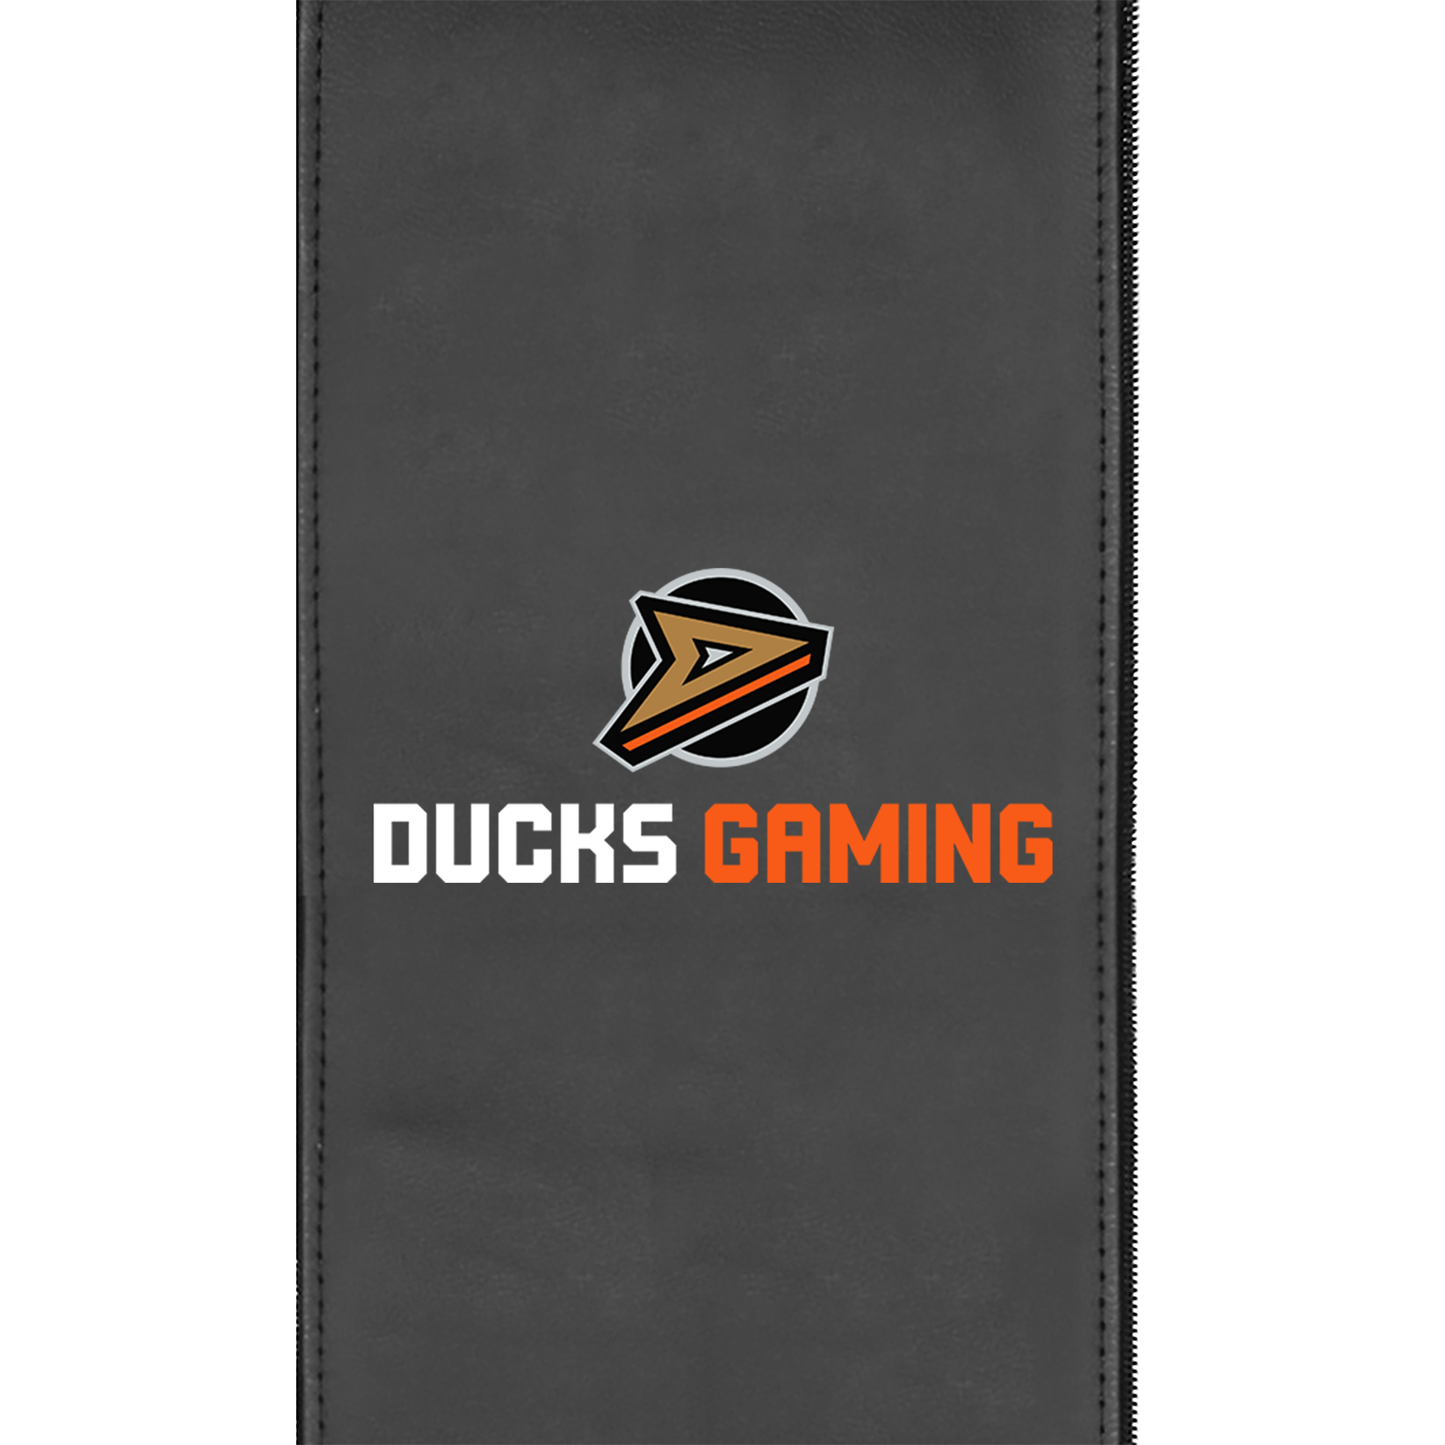 Relax Home Theater Recliner with Ducks Gaming Logo